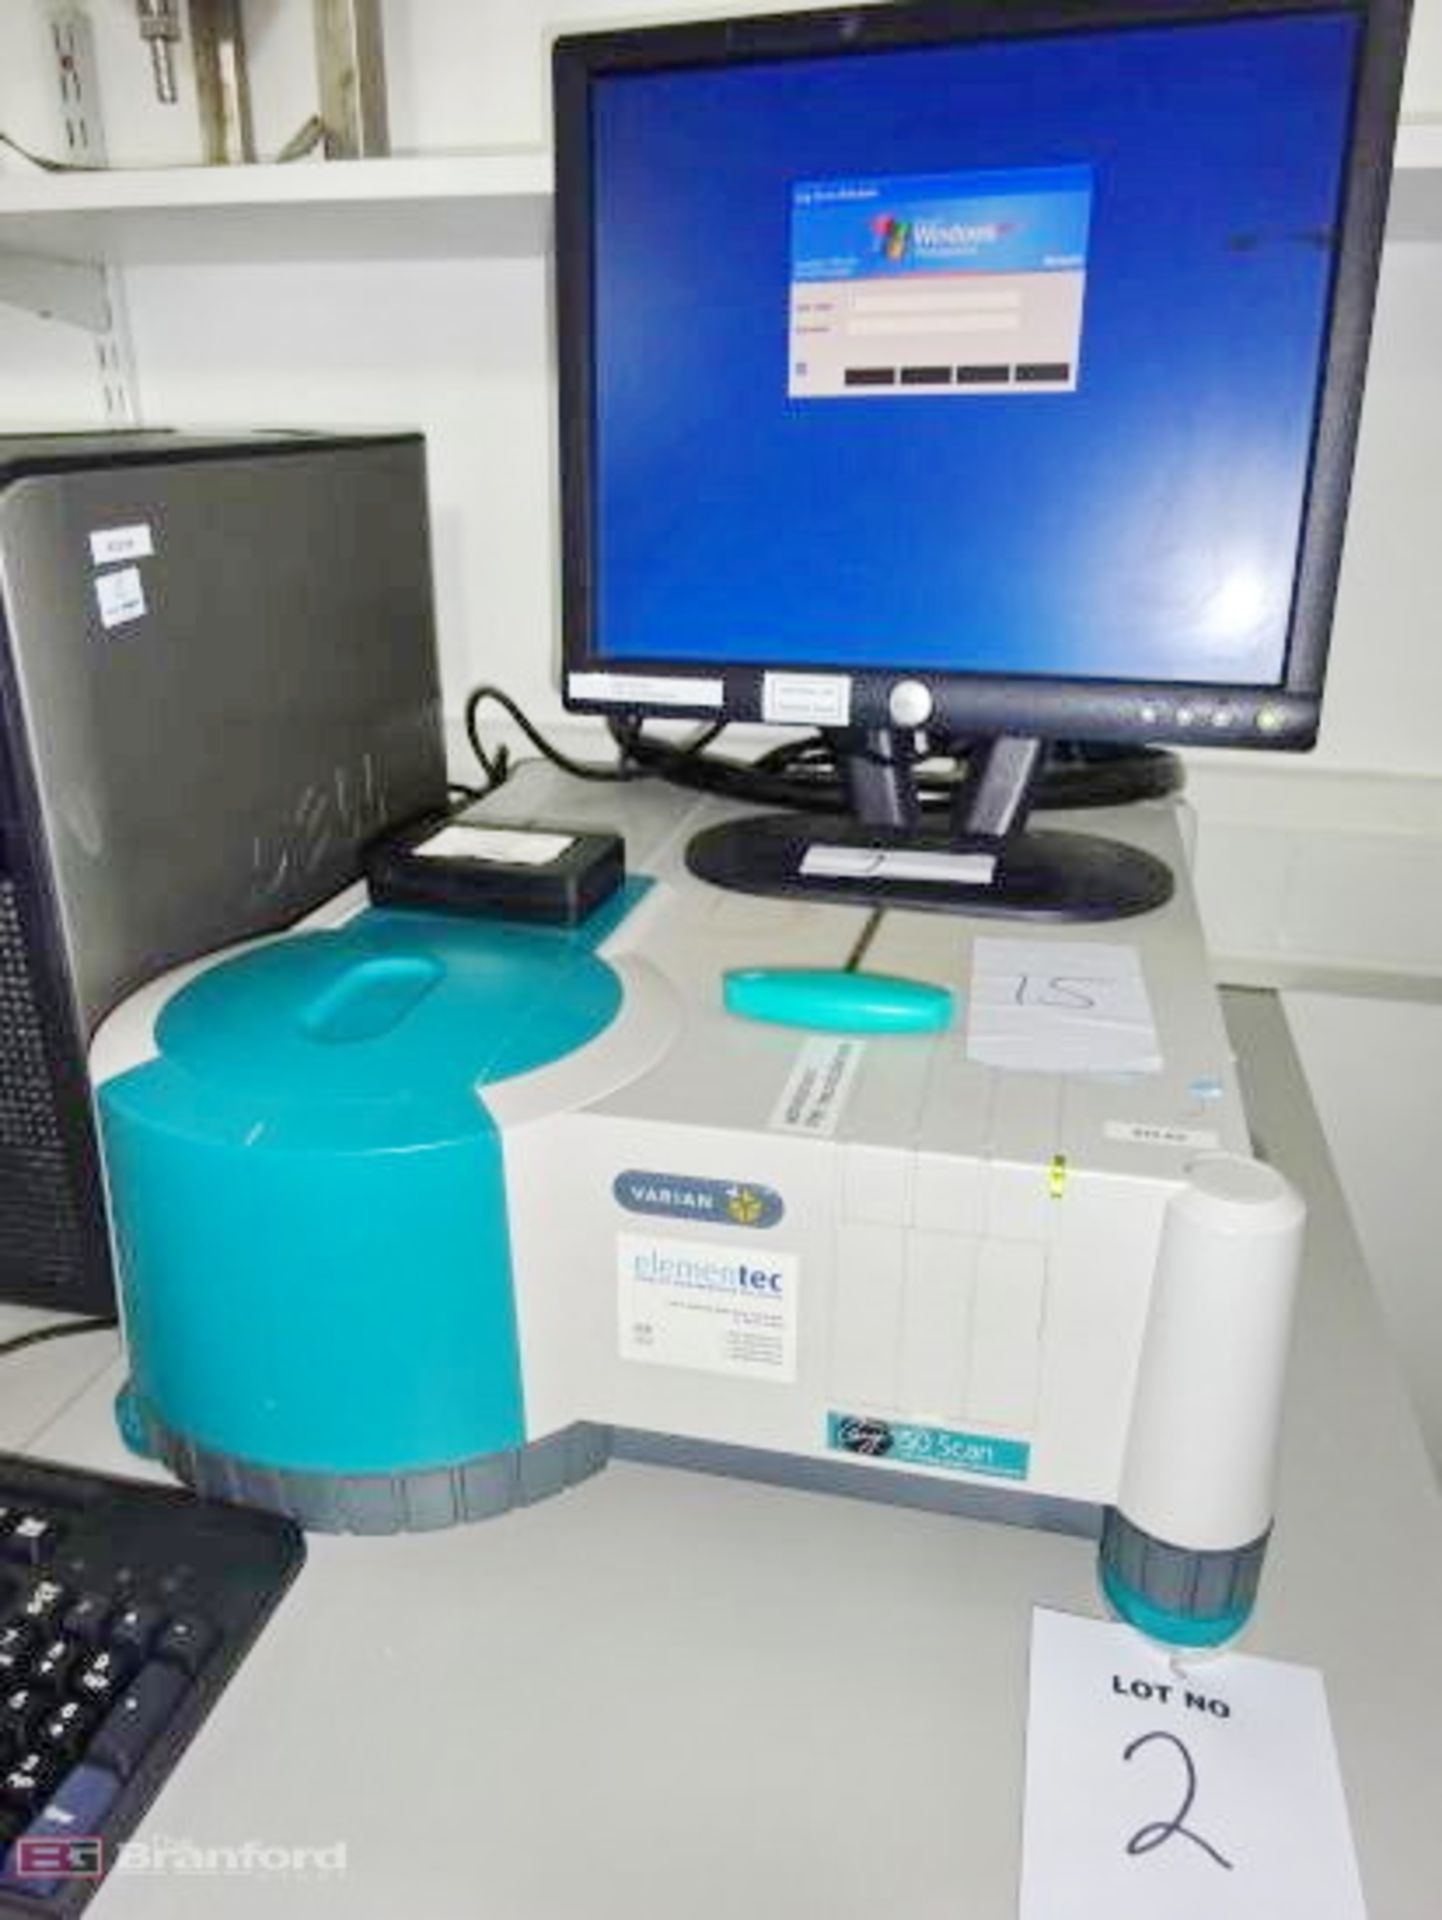 Varian Cary 50 Scan UV-Visible Spectrophotometer - Image 3 of 3